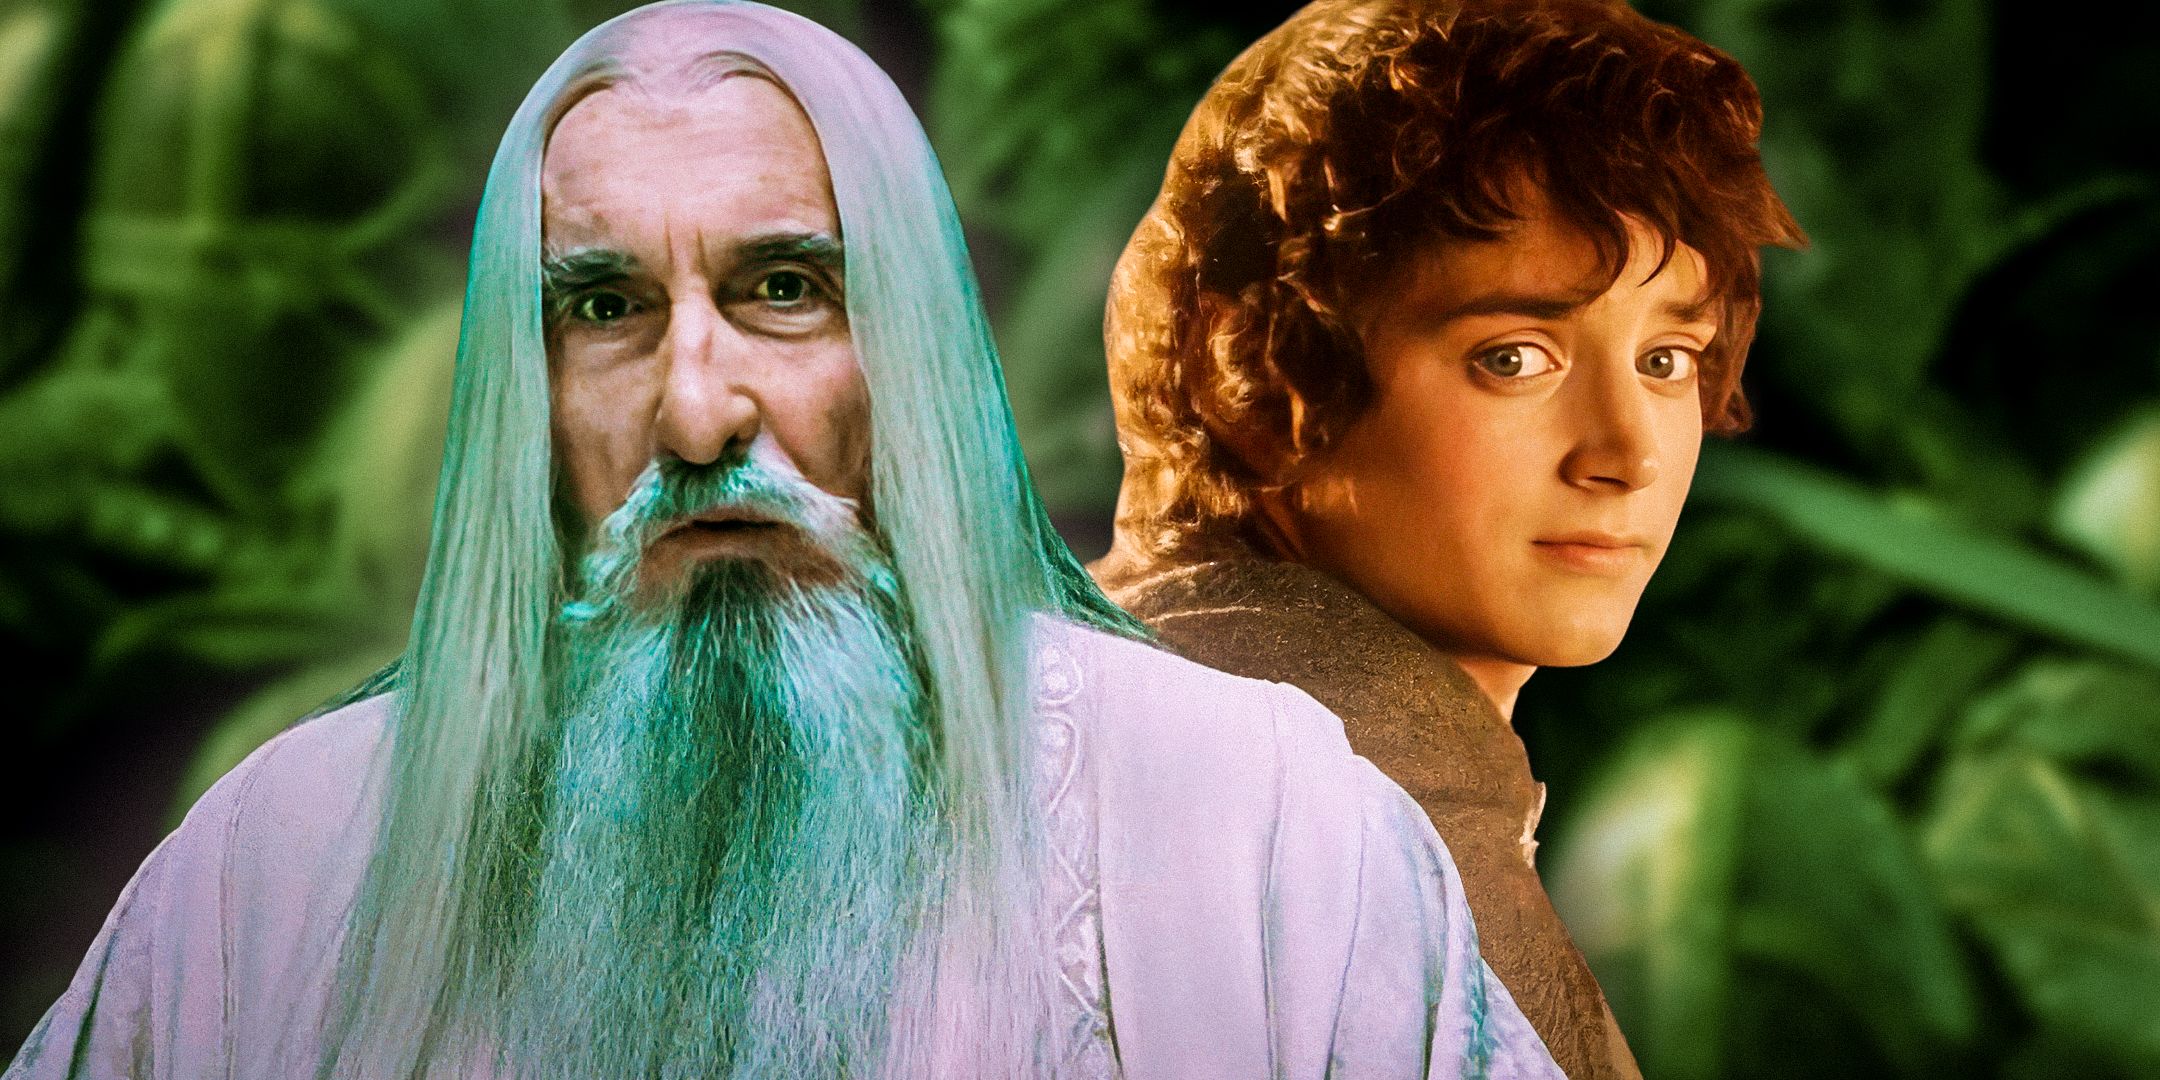 Saruman-and-Frodo-from-The-Lord-of-the-Rings-Franchise